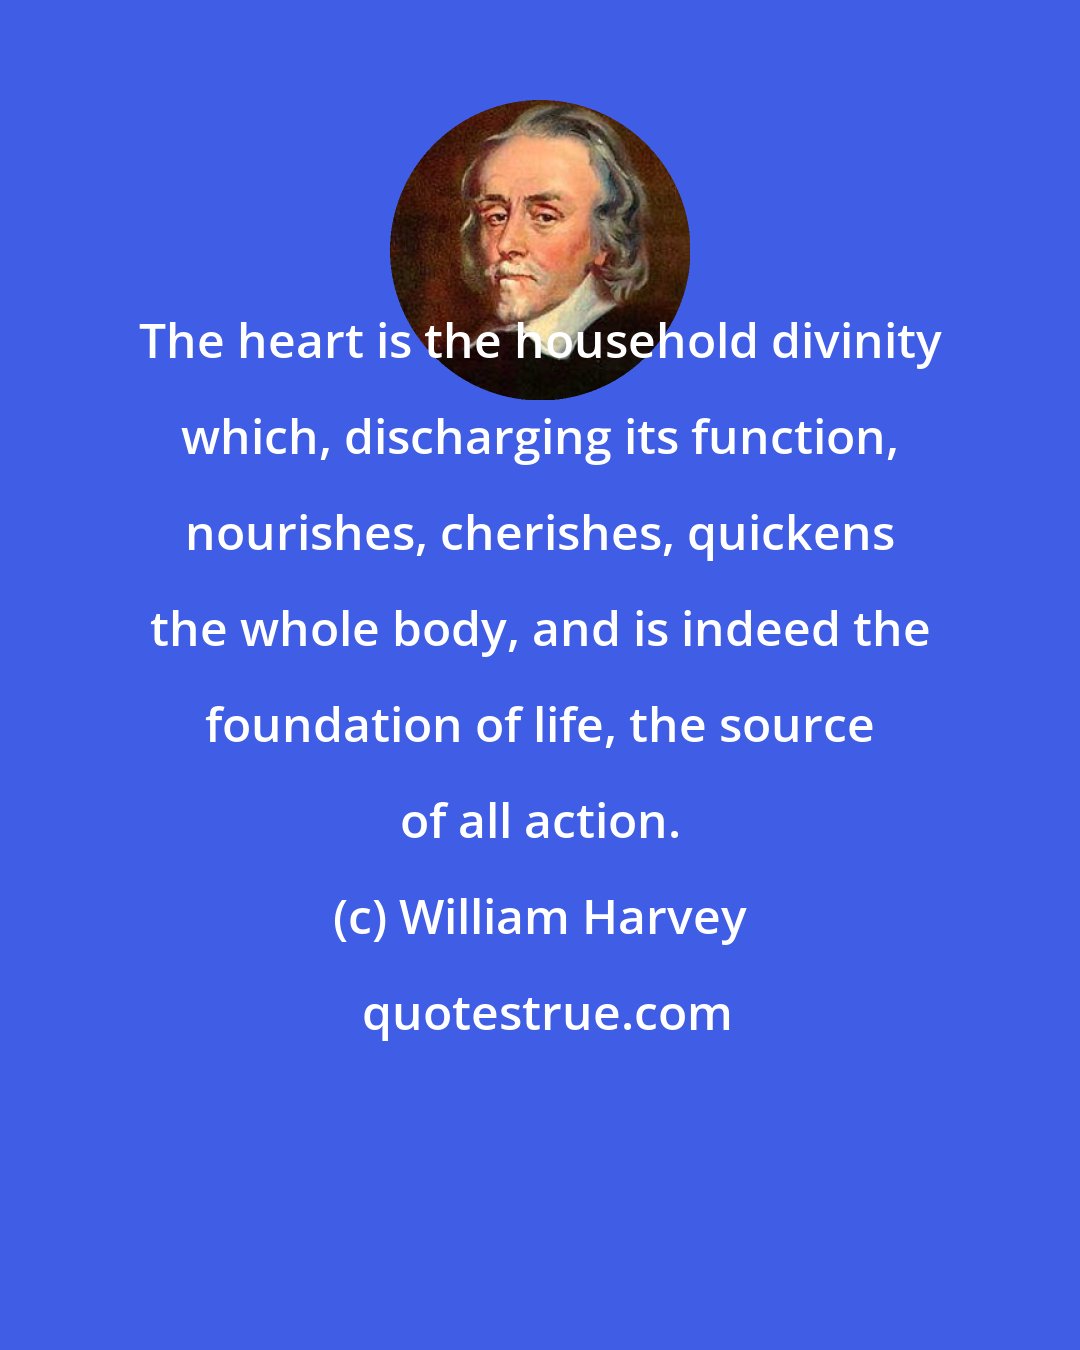 William Harvey: The heart is the household divinity which, discharging its function, nourishes, cherishes, quickens the whole body, and is indeed the foundation of life, the source of all action.